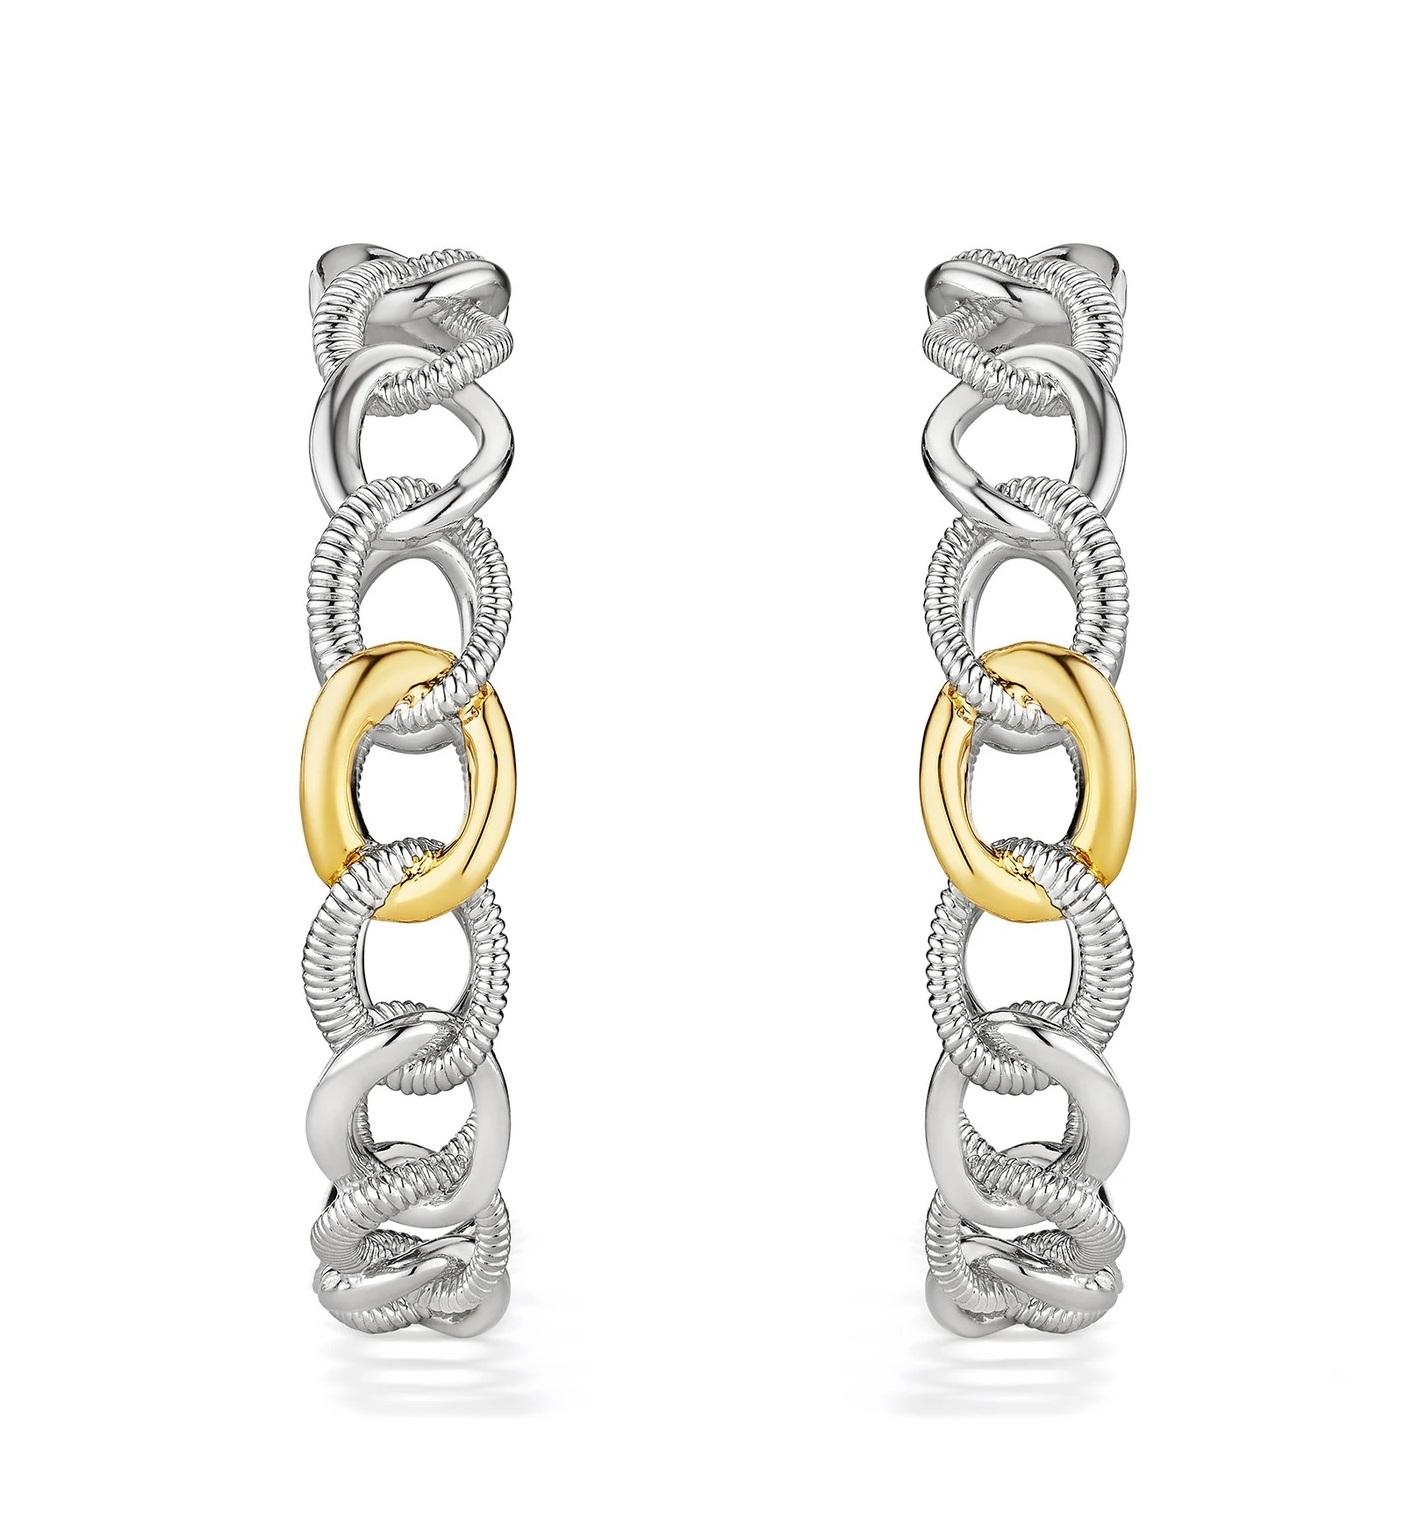 Our Eternity Earrings explore a variety of the textures, woven together in a shape that represents the bond of love that is both infinite and everlasting.

Sterling Silver with 18K Gold
Width: ¼